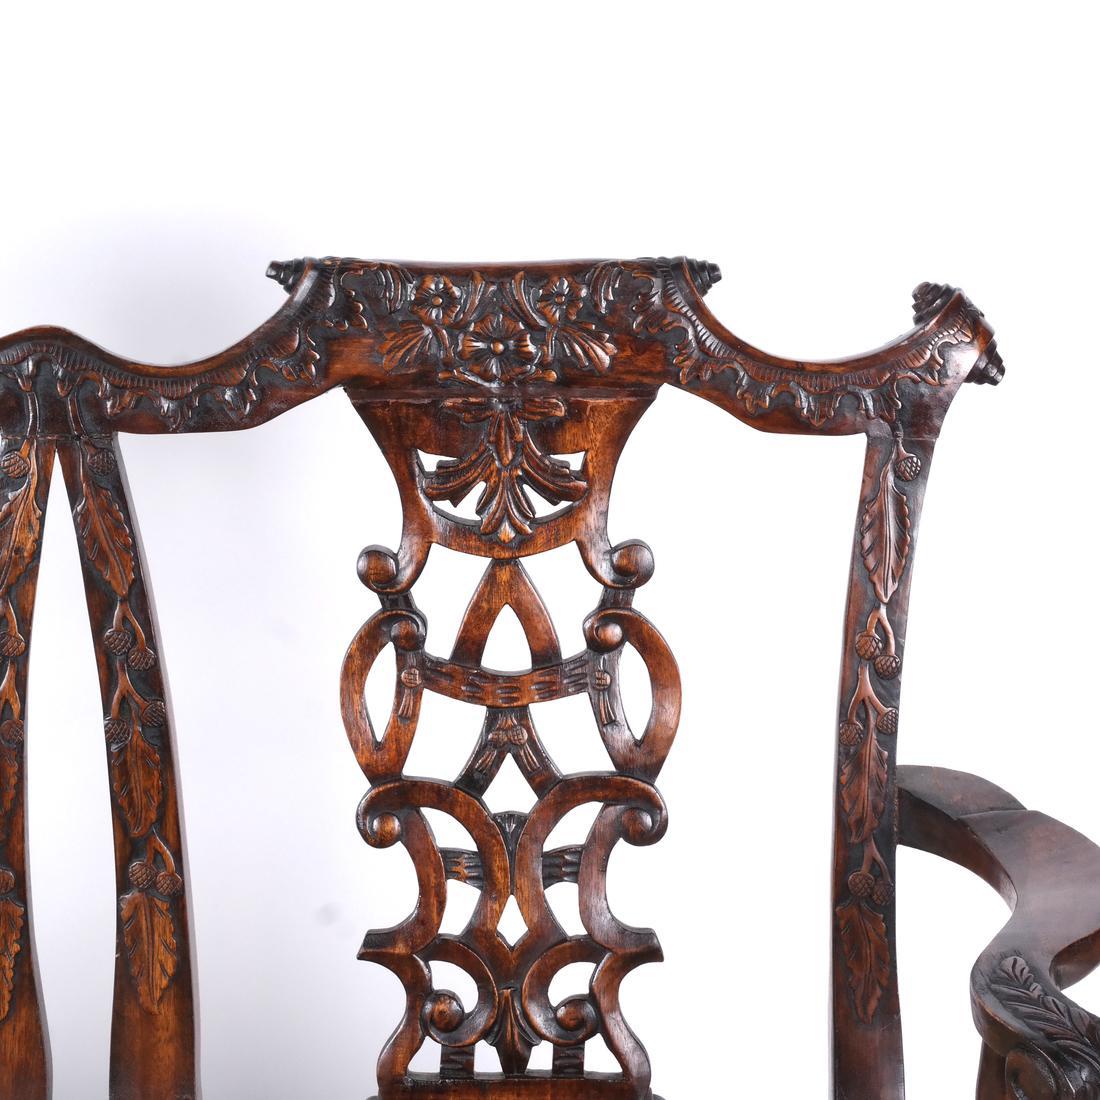 A fine quality 19th century carved mahogany triple chair back settee featuring flowers, ribbons, and ball and claw feet, 1880.